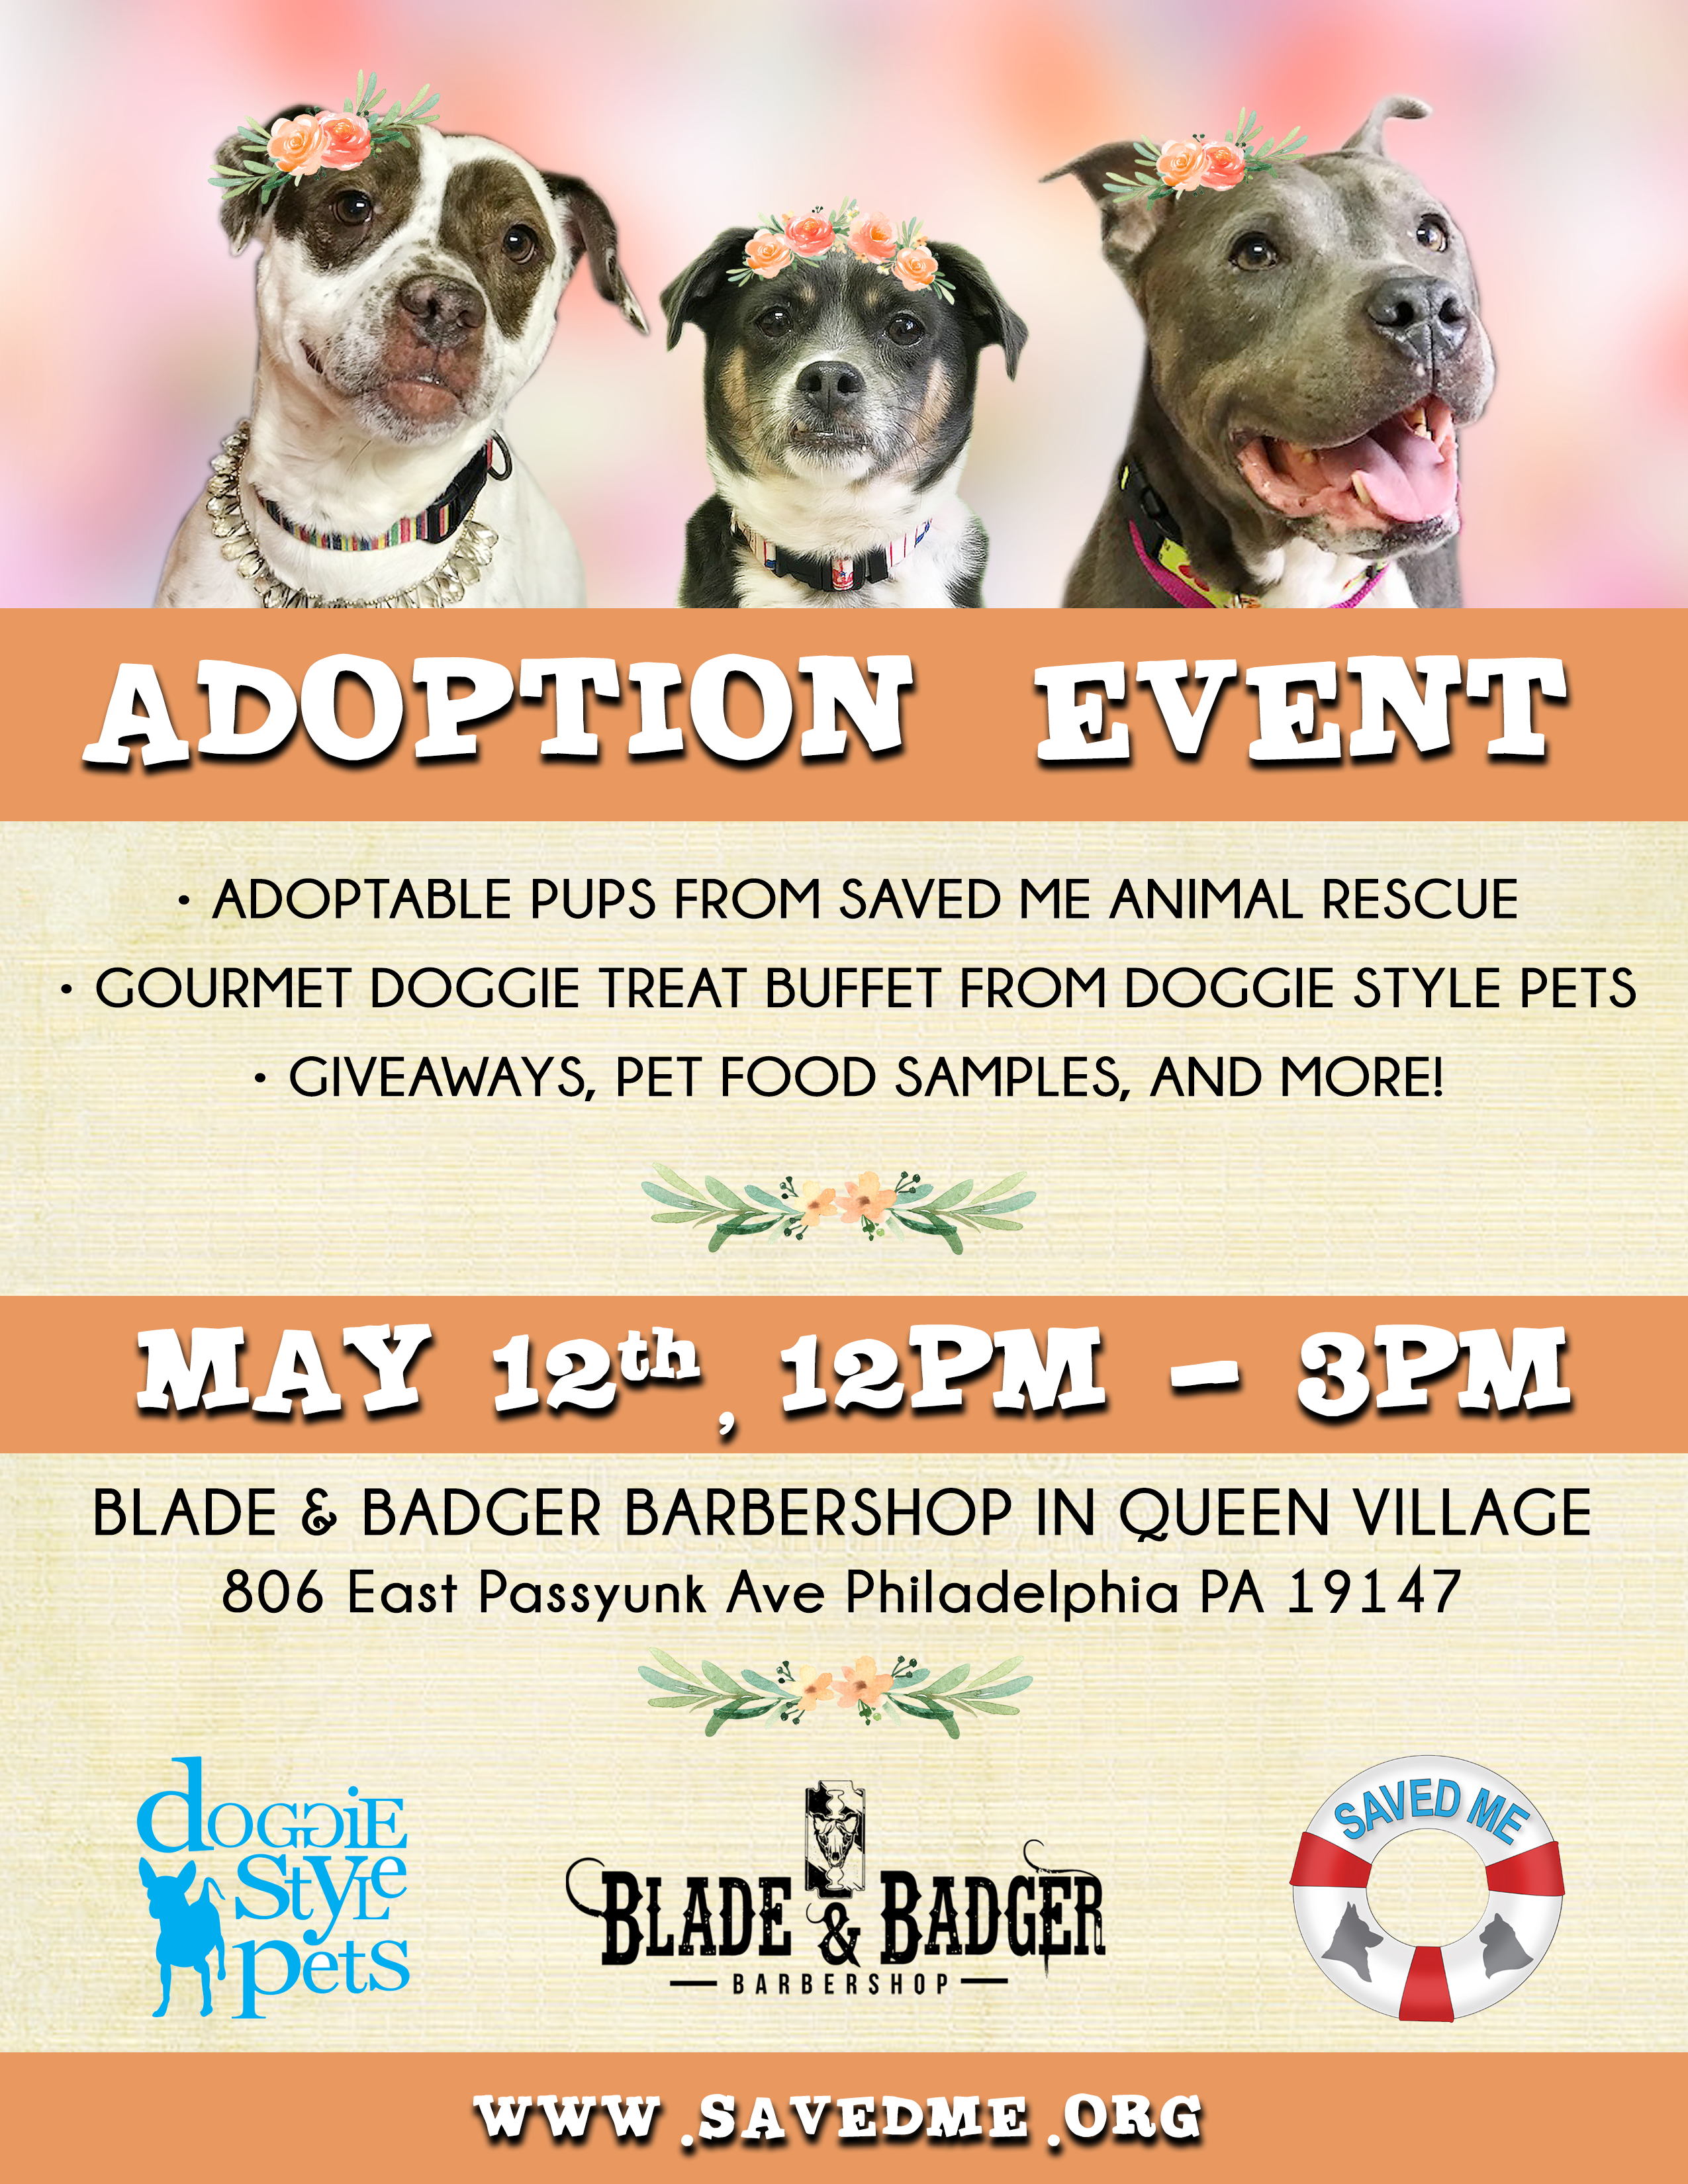 adopt a puppy events near me